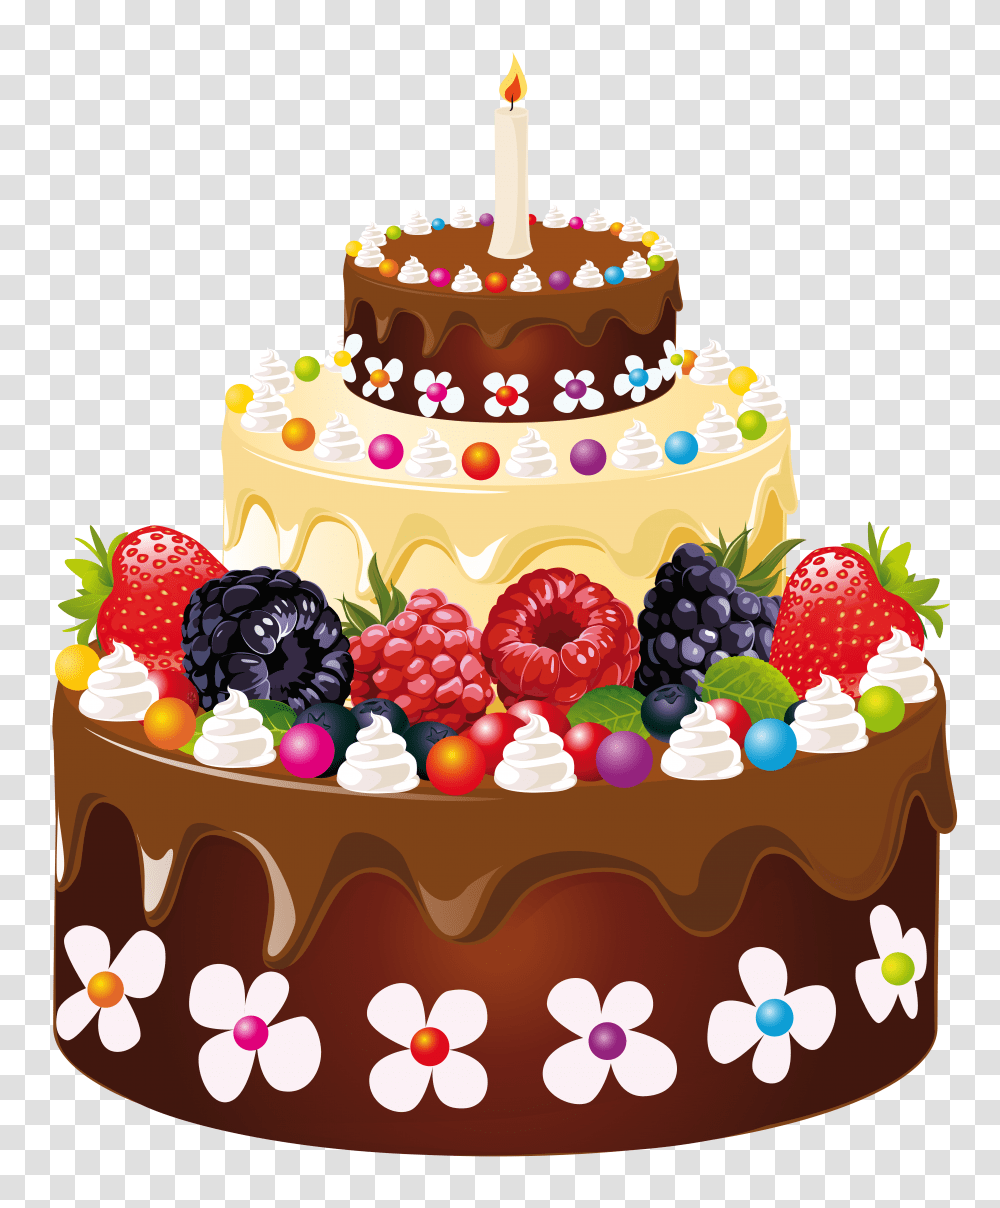 Cake With Candles & Clipart Free Download Ywd Happy Birthday Cake, Dessert, Food, Torte, Wedding Cake Transparent Png